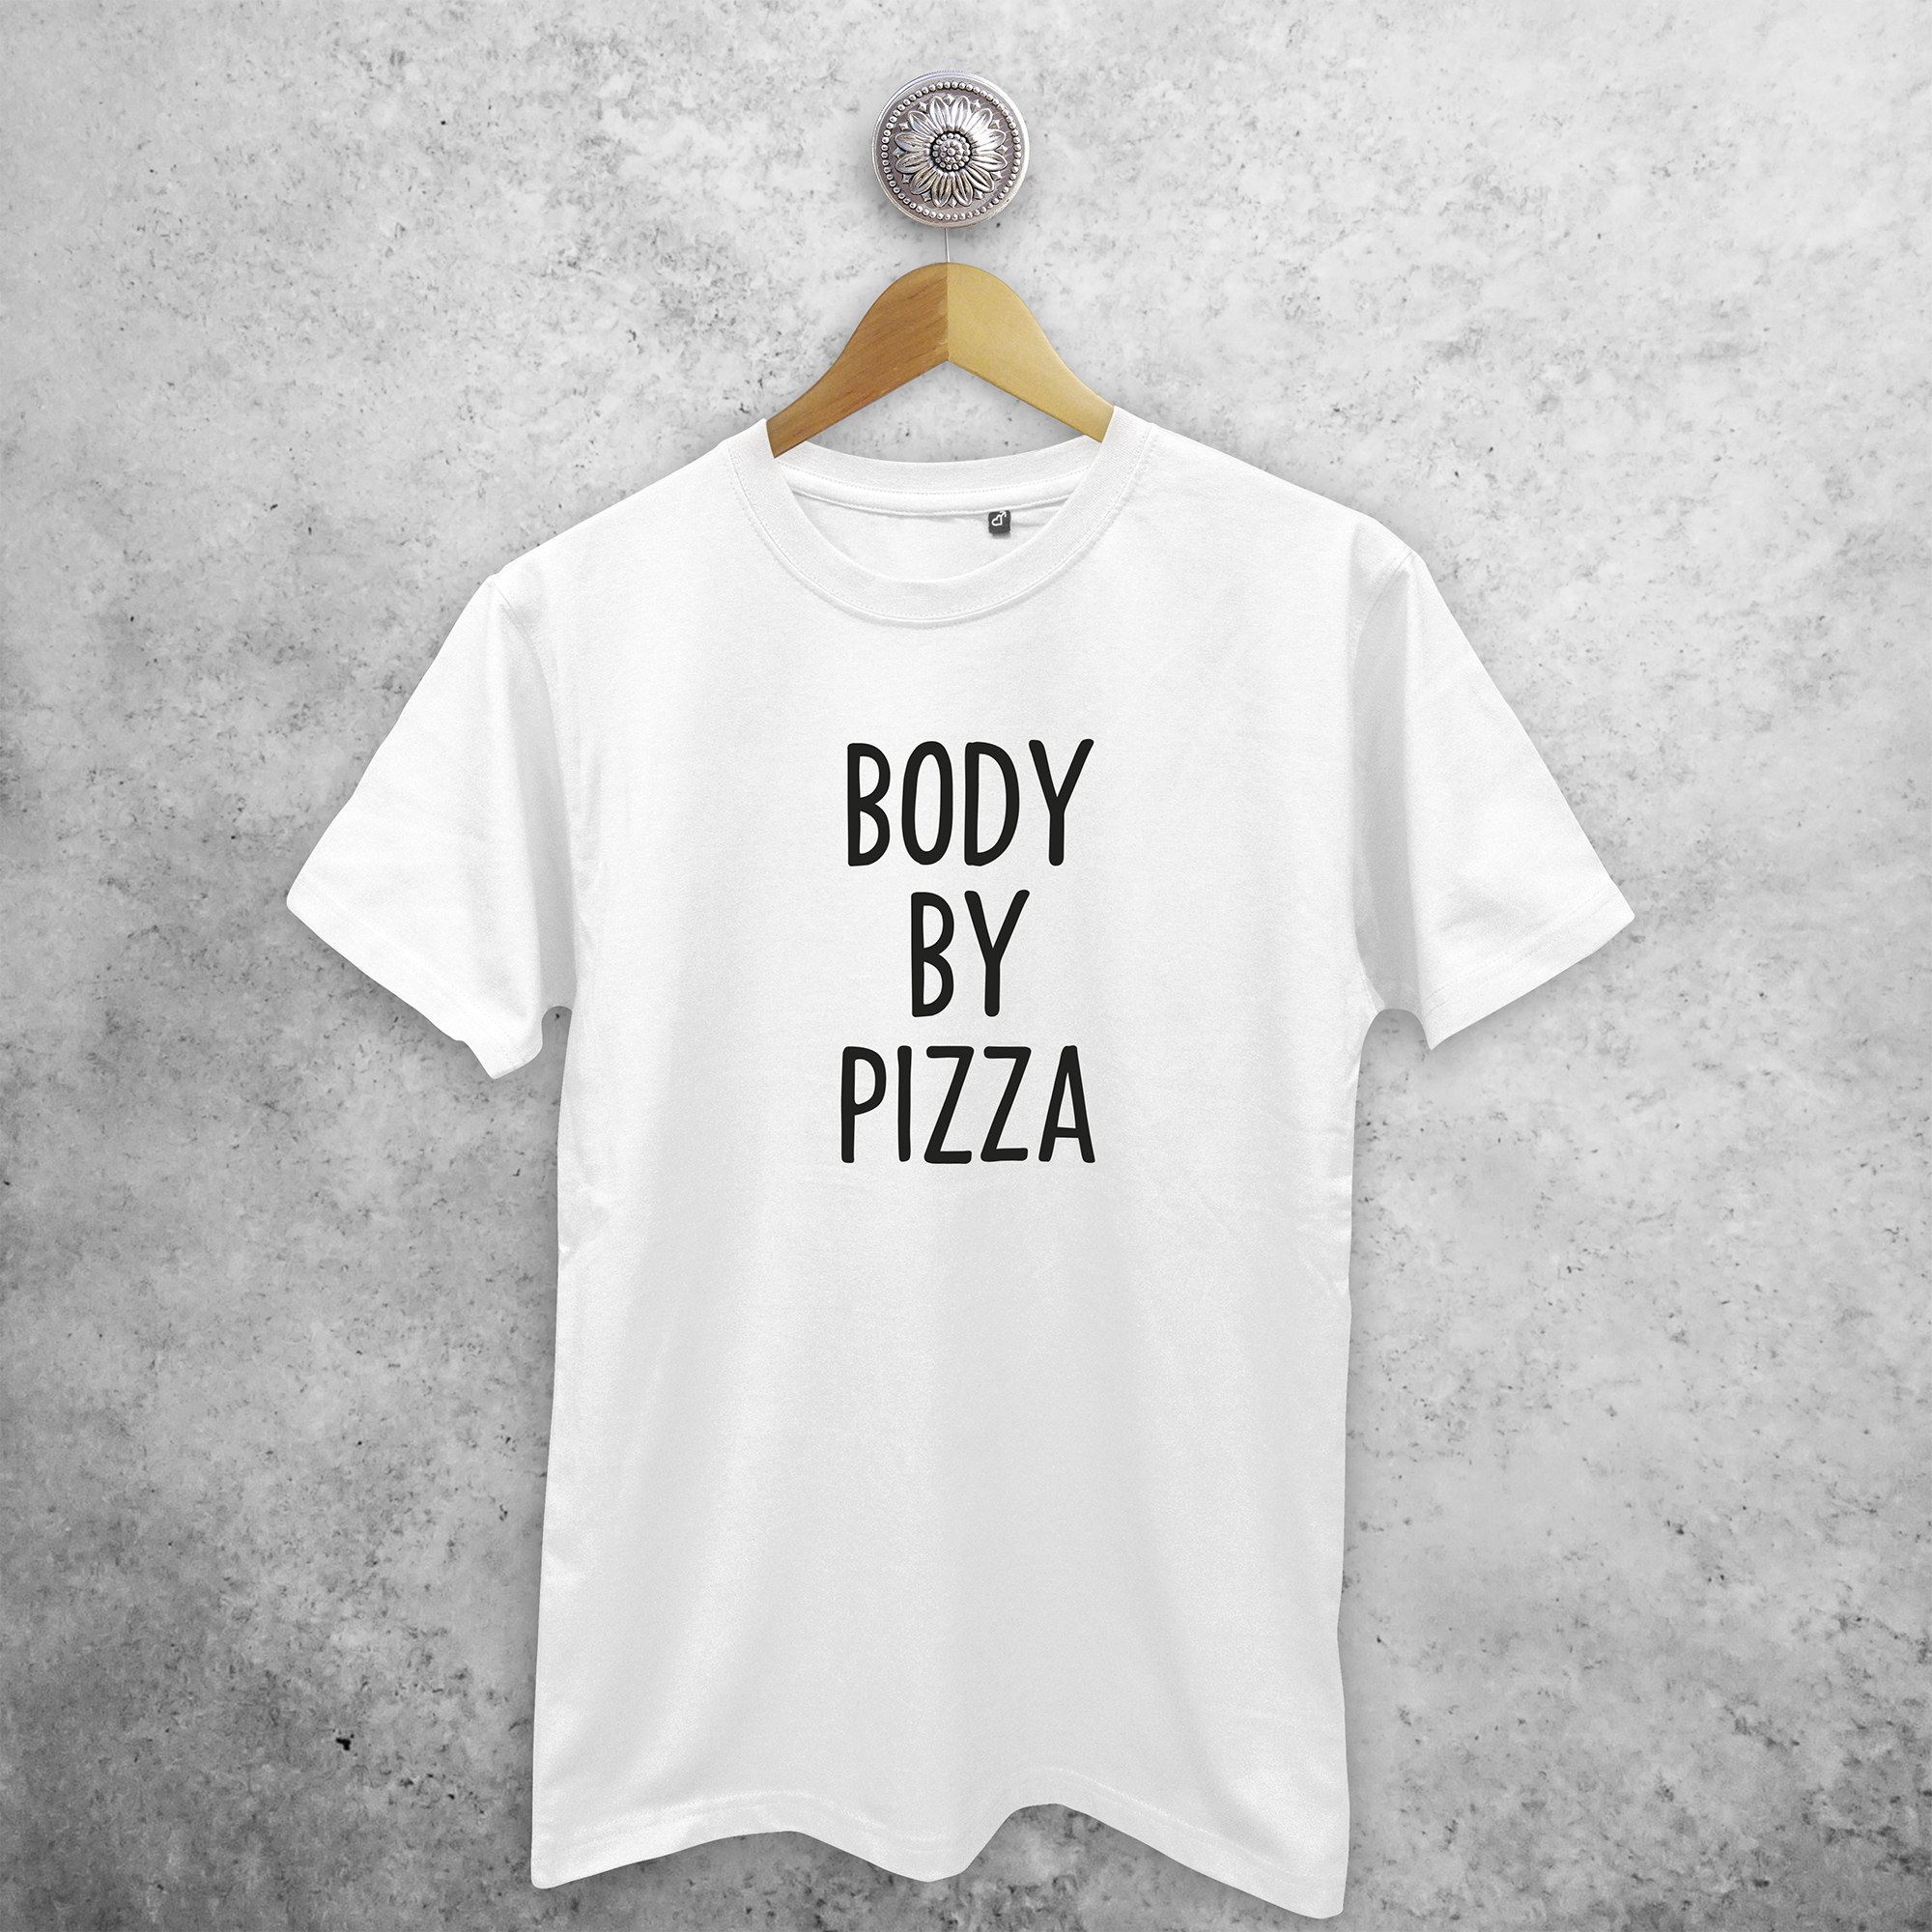 'Body by pizza' adult shirt